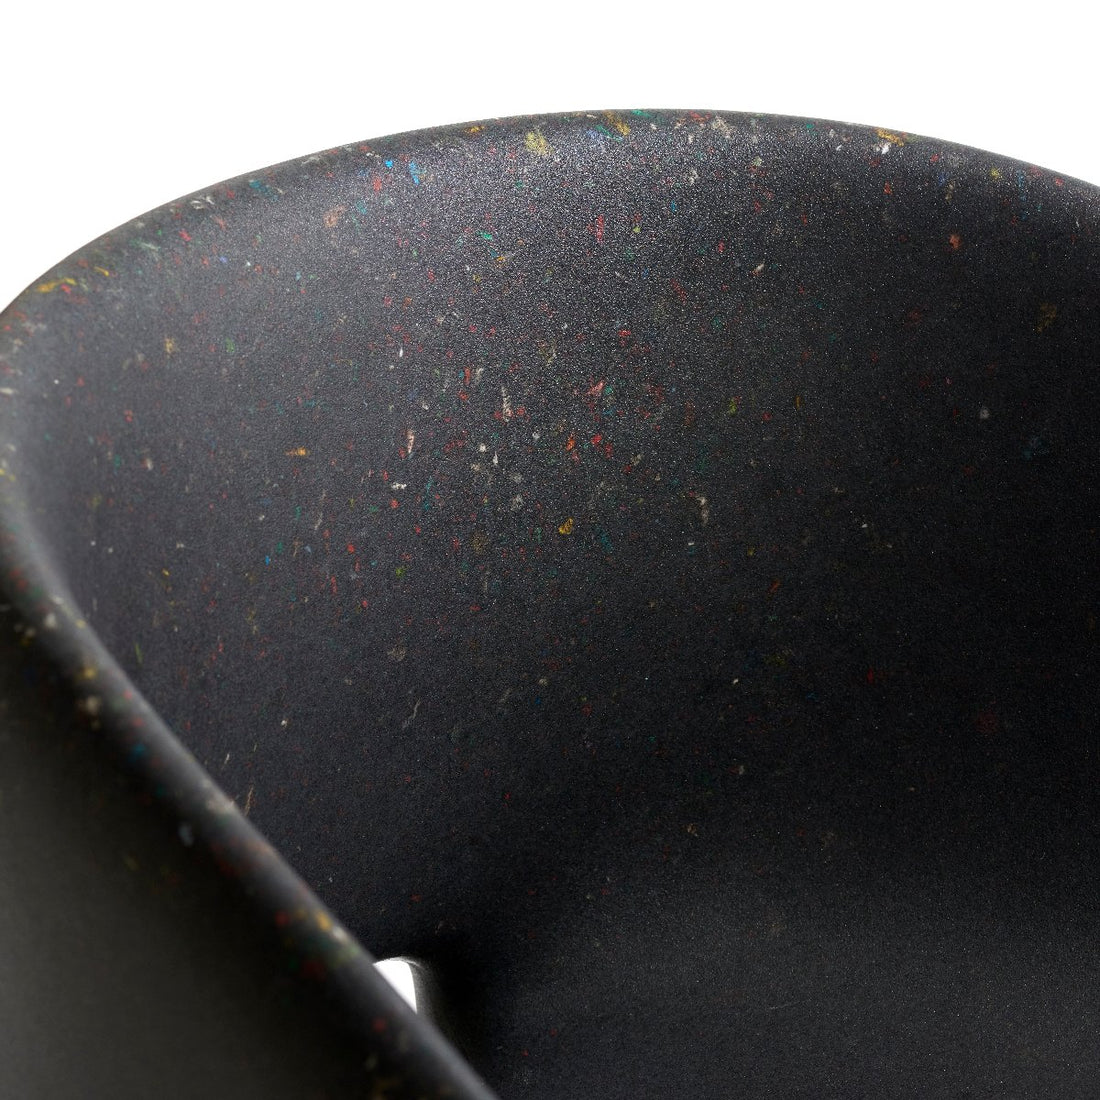 ecoBirdy Richard Chair Colour Shadow detail shot. Showing it&